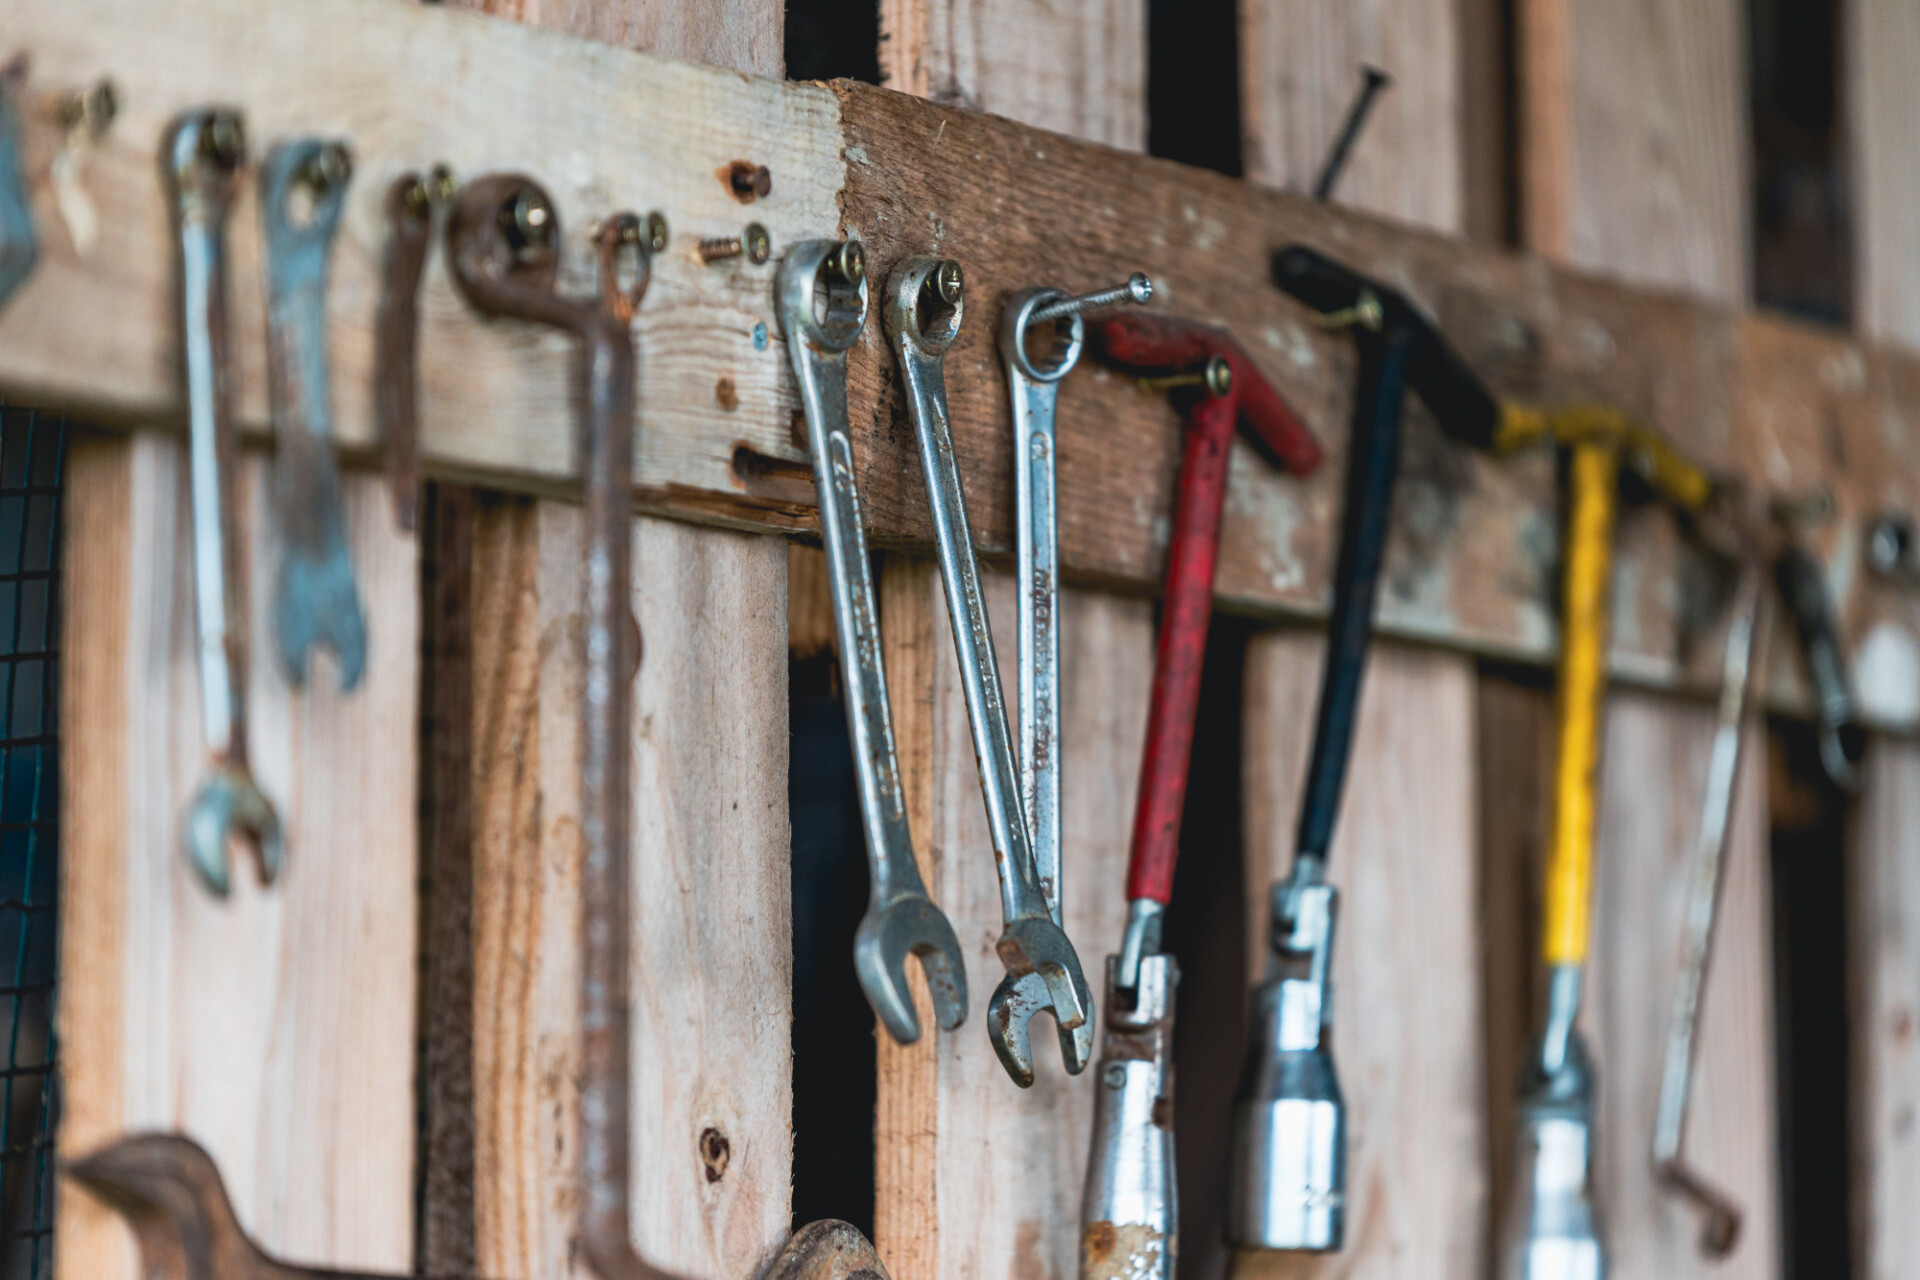 Tools hanging on a wall